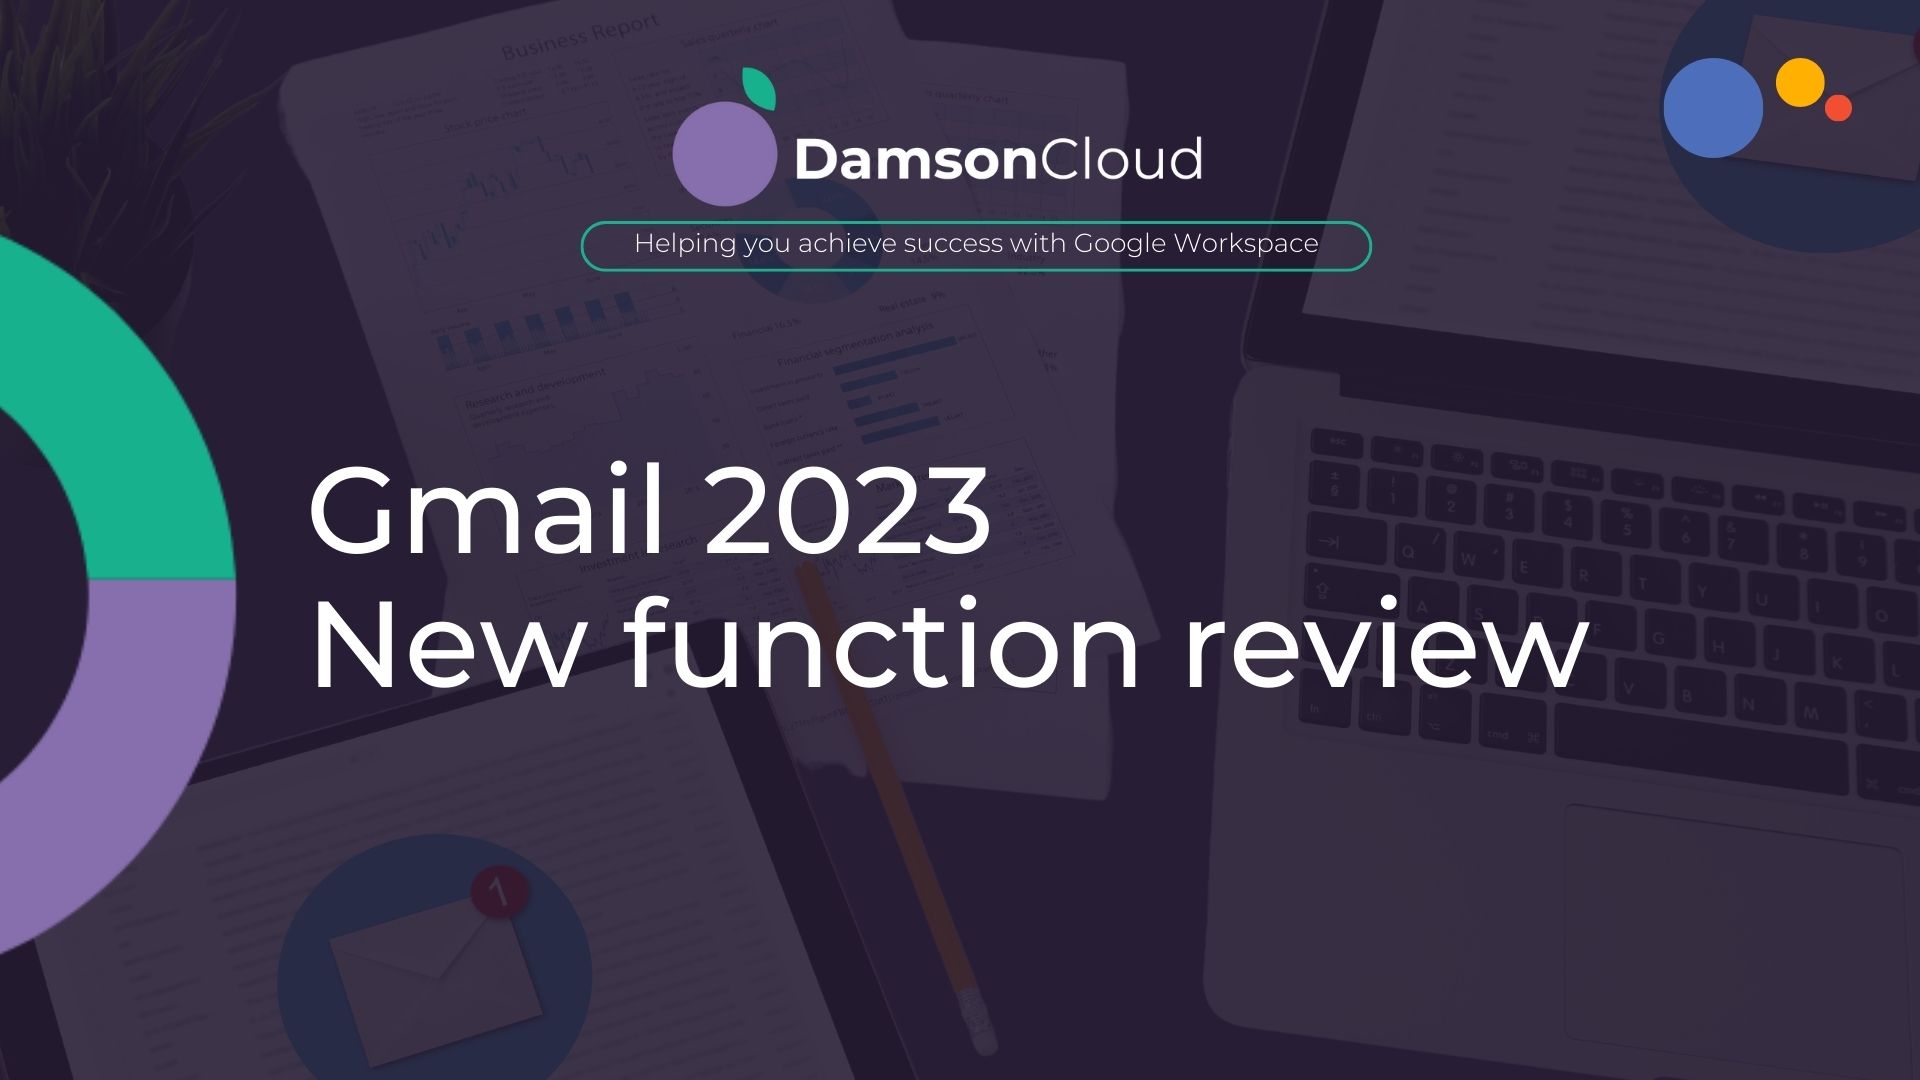 GMAIL NEW FUNCTIONS from 2023 Review